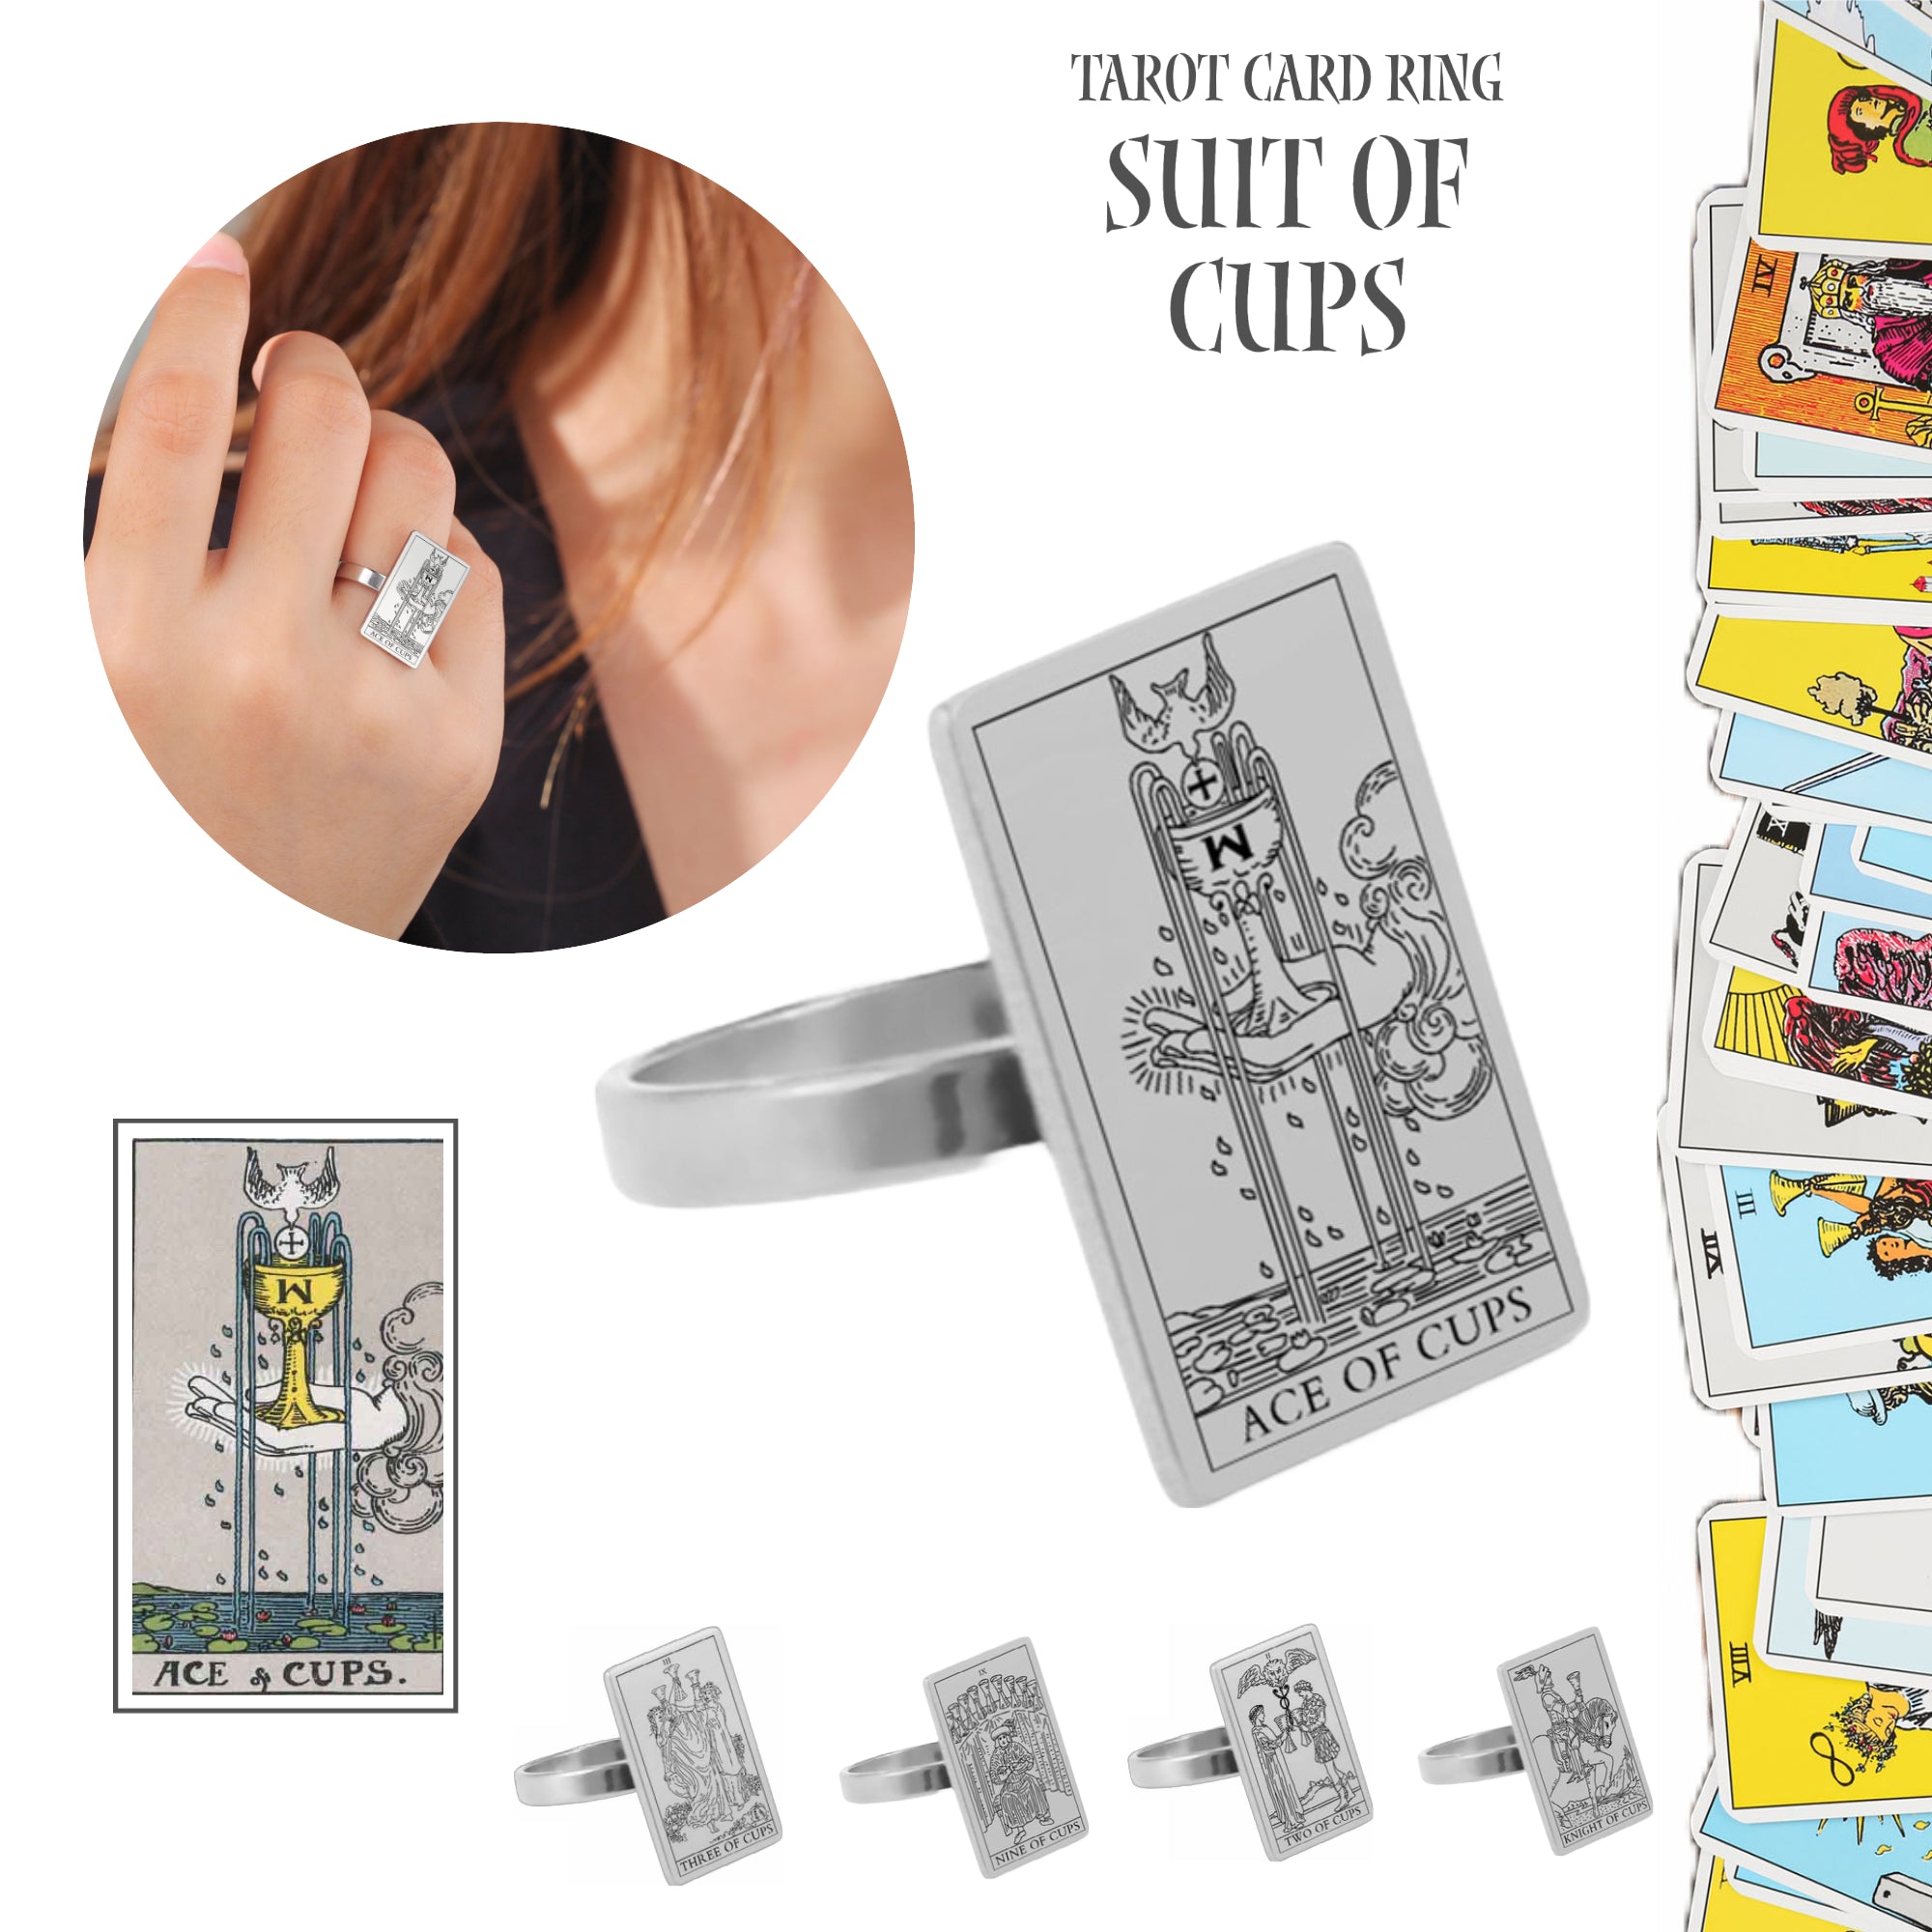 Tarot Card Ring - Silver | Suit of Cups Charms | Esoteric Occult Jewelry | Apollo Tarot